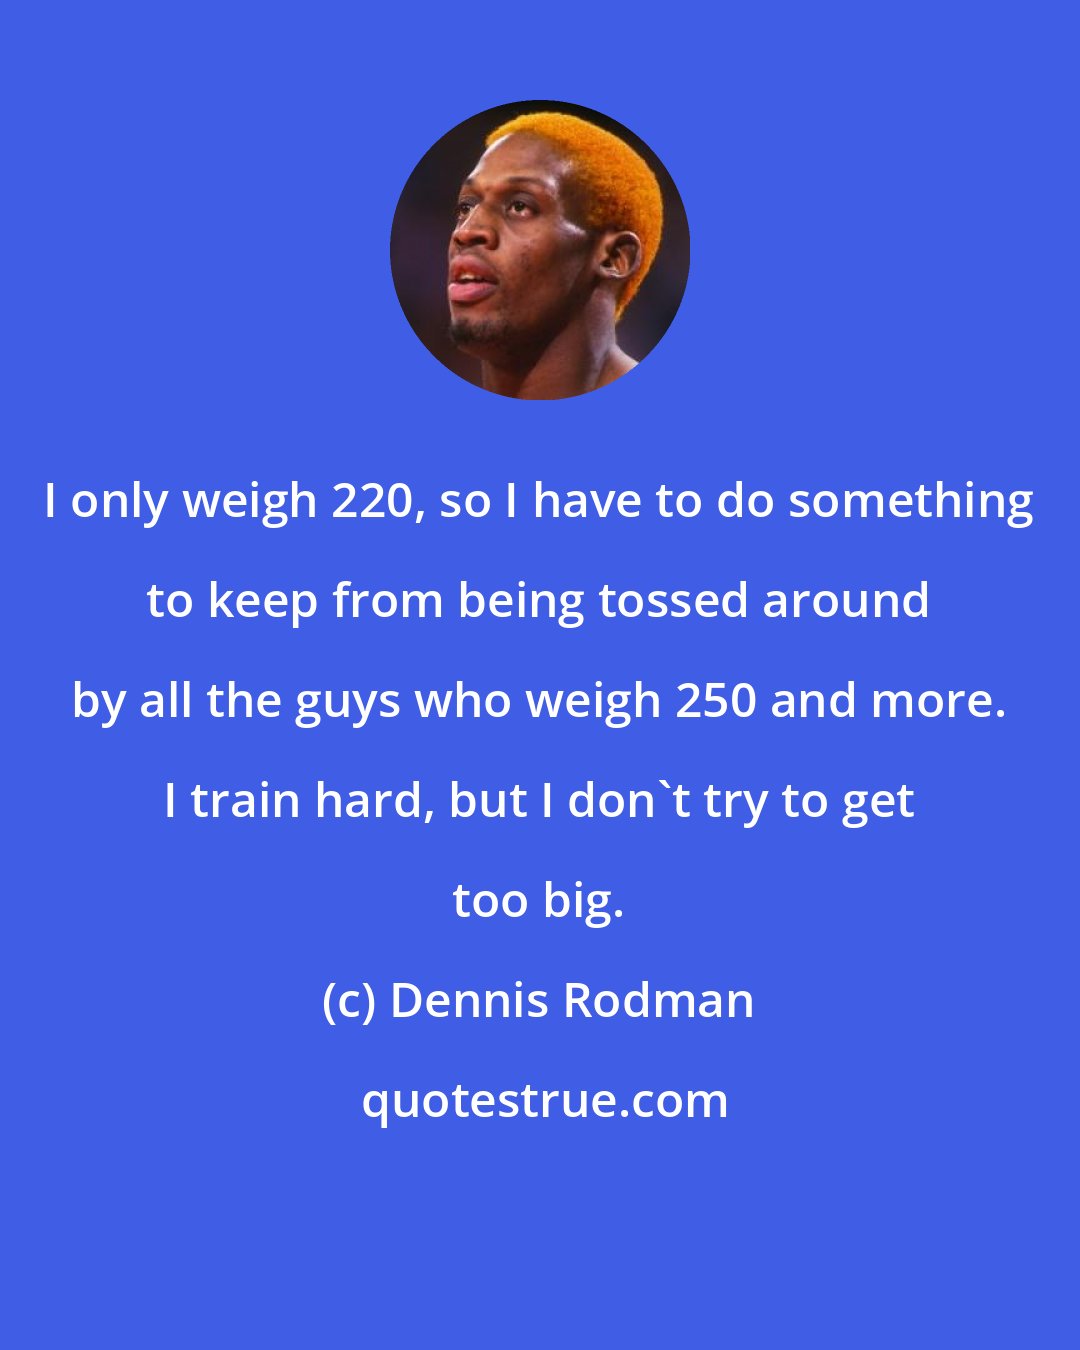 Dennis Rodman: I only weigh 220, so I have to do something to keep from being tossed around by all the guys who weigh 250 and more. I train hard, but I don't try to get too big.